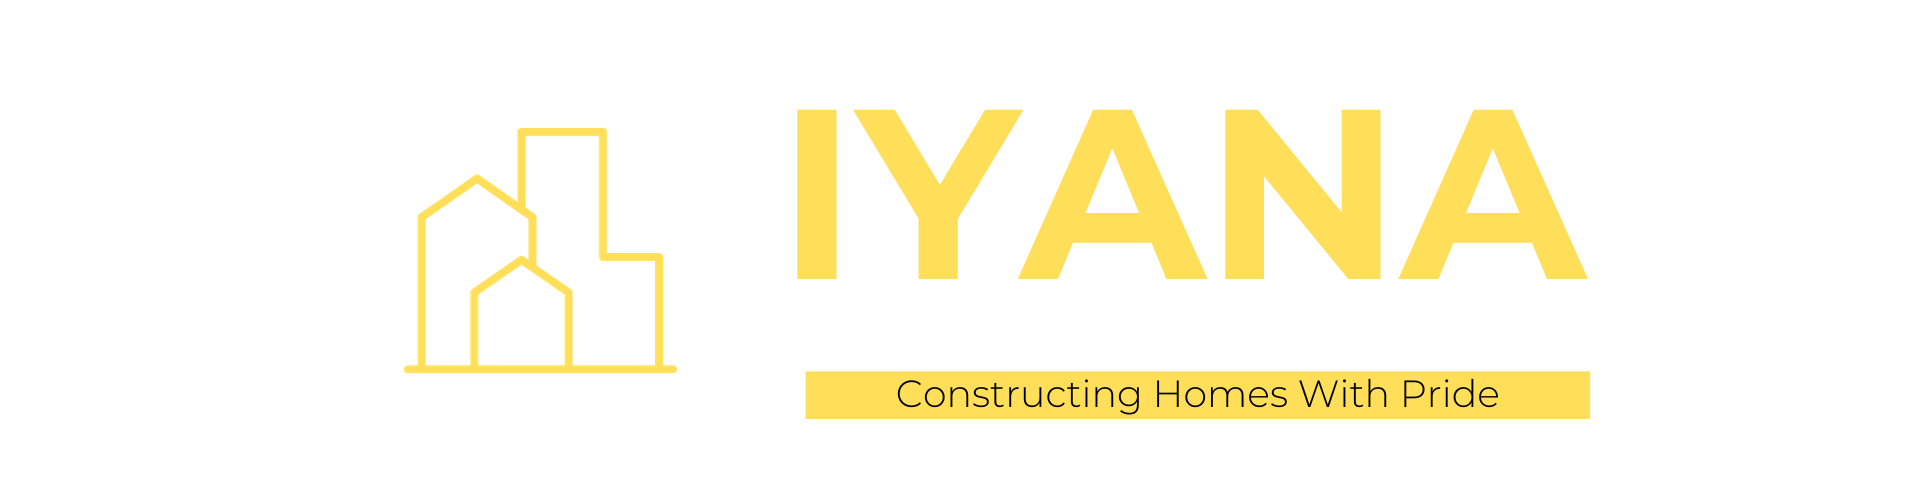 IYANA Project Management & Construction